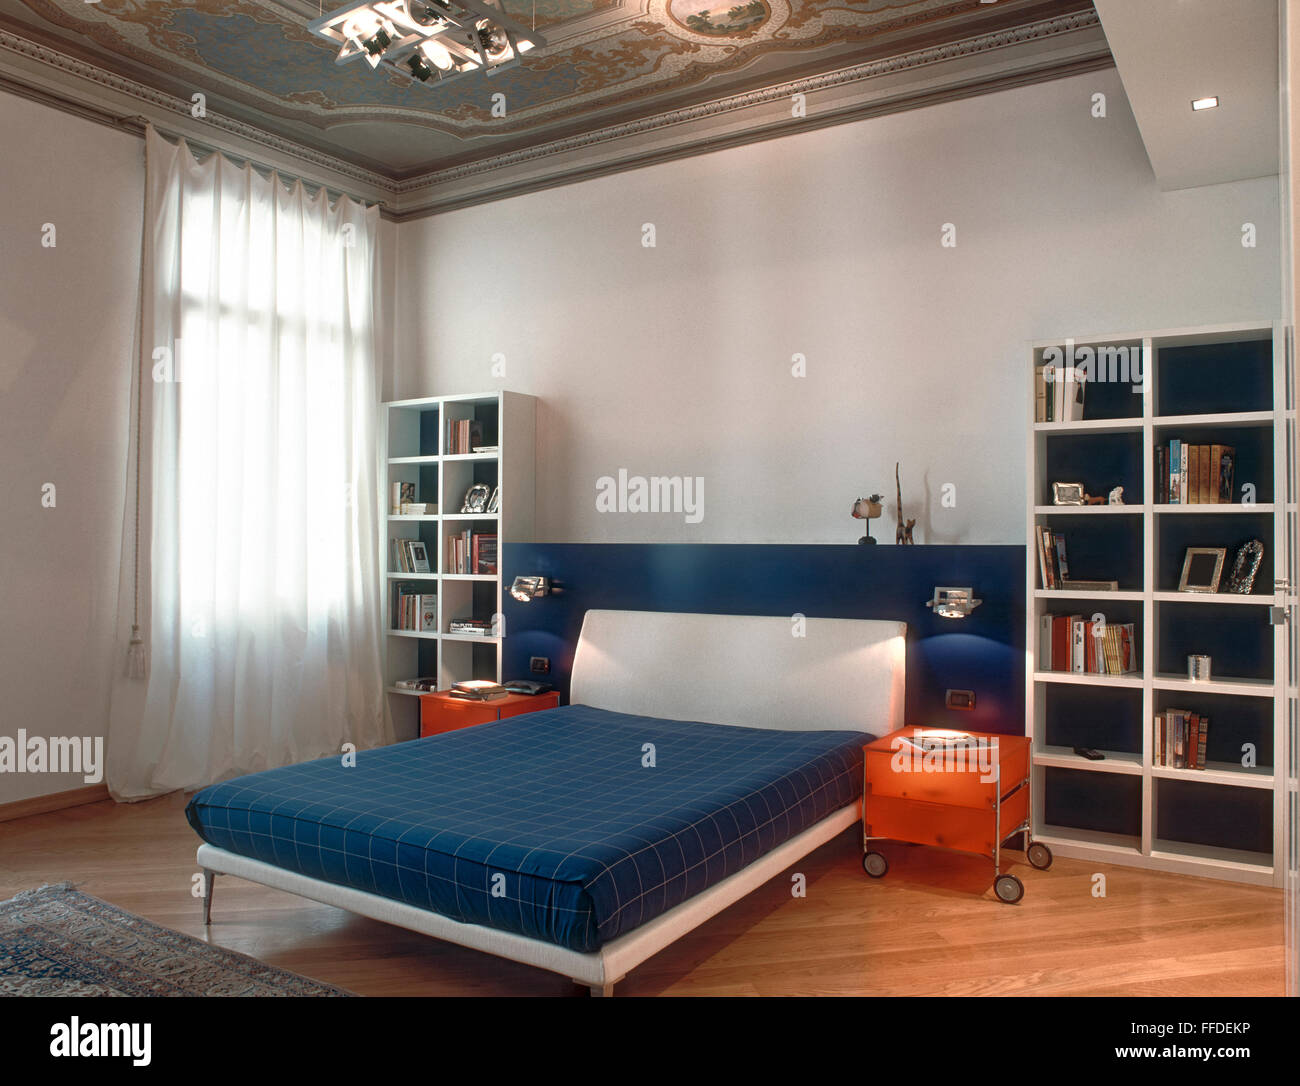 interior view of a classic bedroom with modern bed, fresco and wood floor Stock Photo